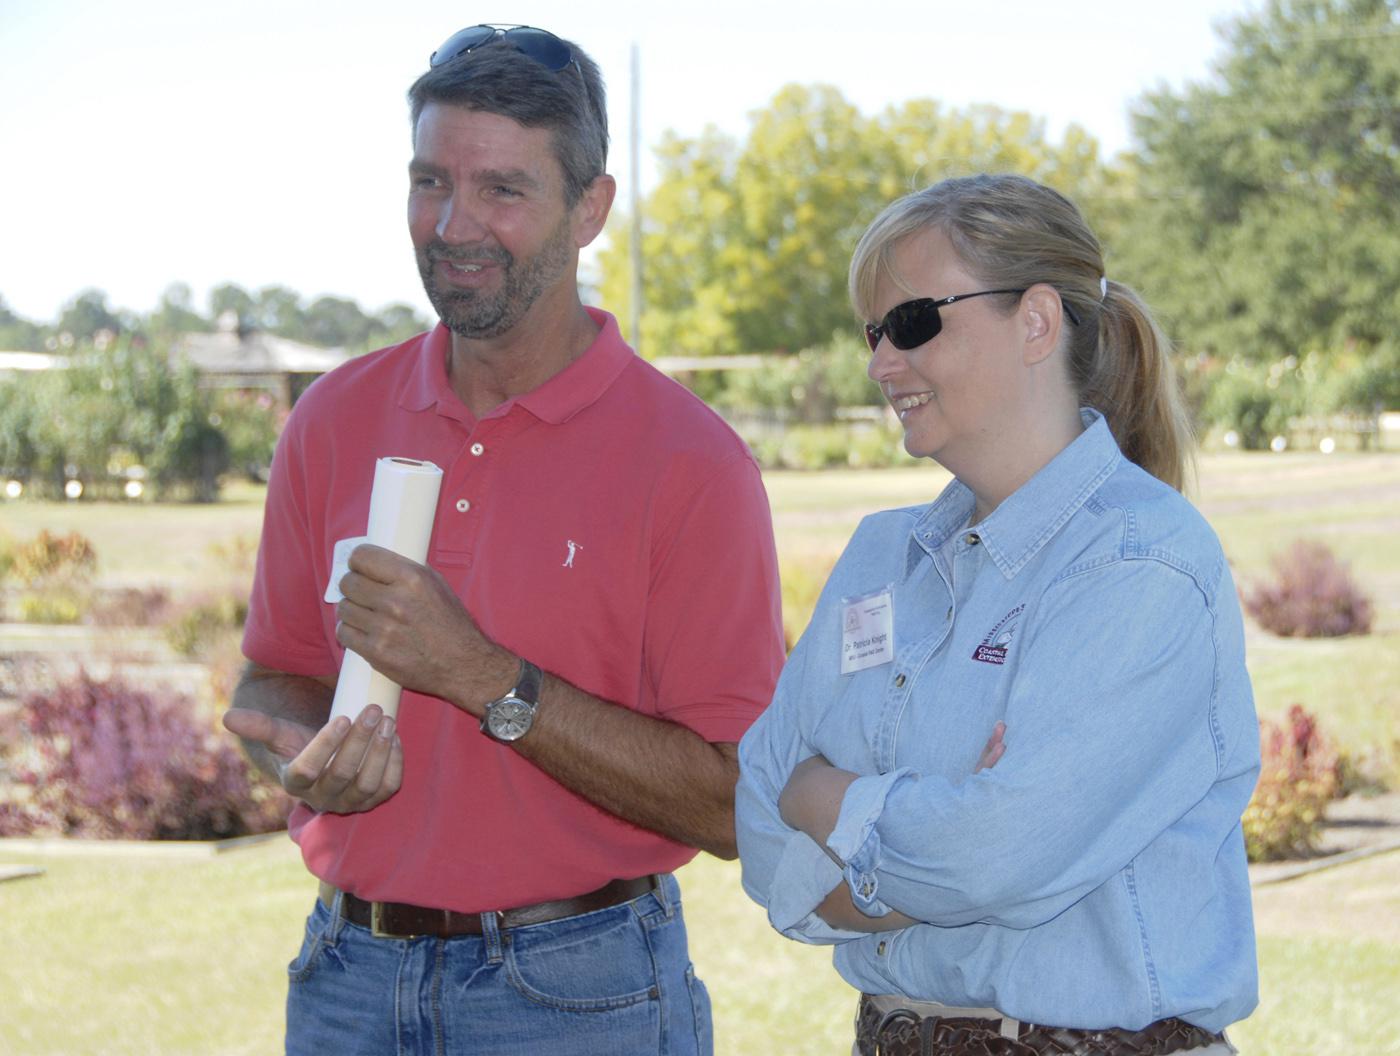 Dan Batson, owner of GreenForest Nursery, visits with Patricia Knight, head of the Mississippi State University Coastal Research and Extension Center, at the 2010 Ornamental Horticulture Field Day. (Photo by Cheree Franco)